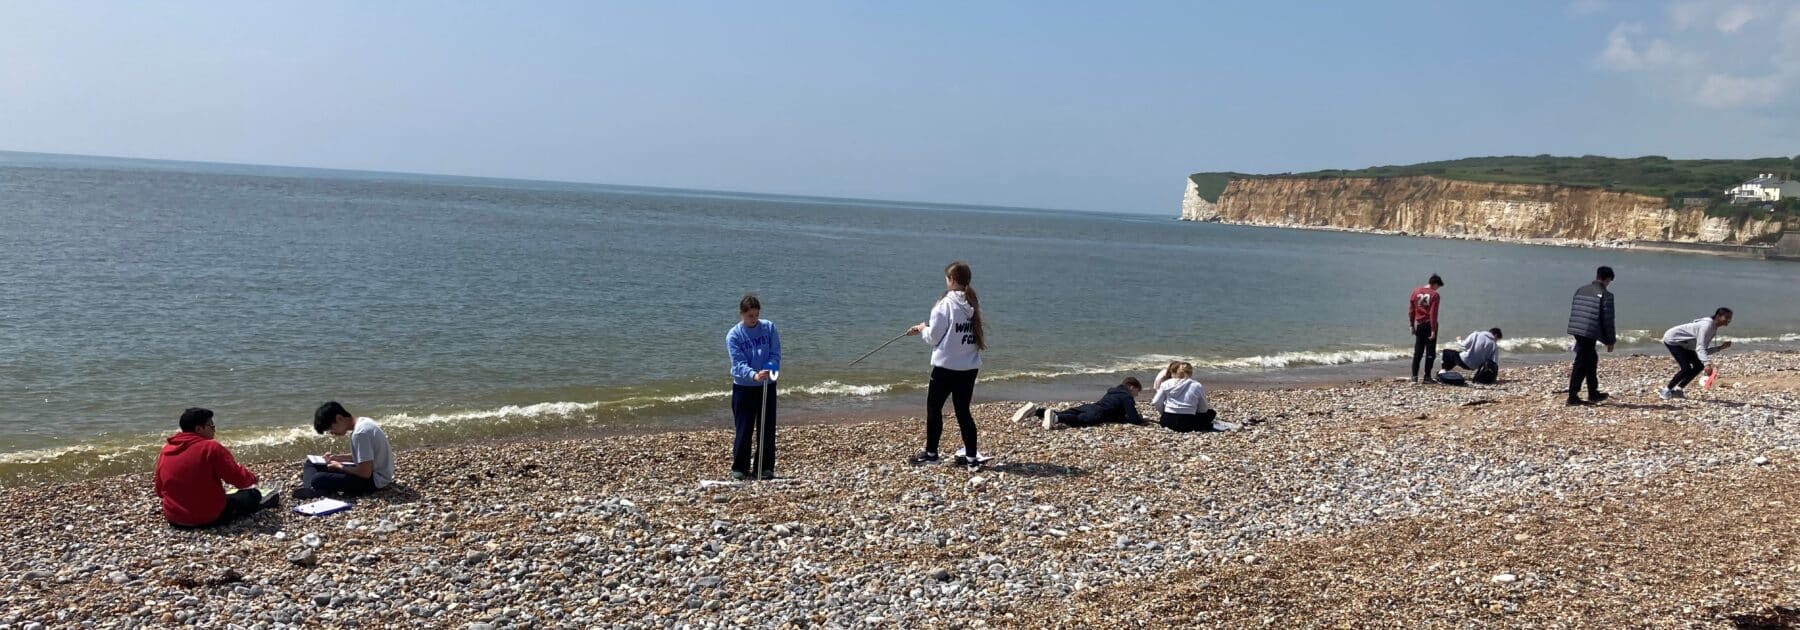 A Day of Coastal Investigations for Geographers